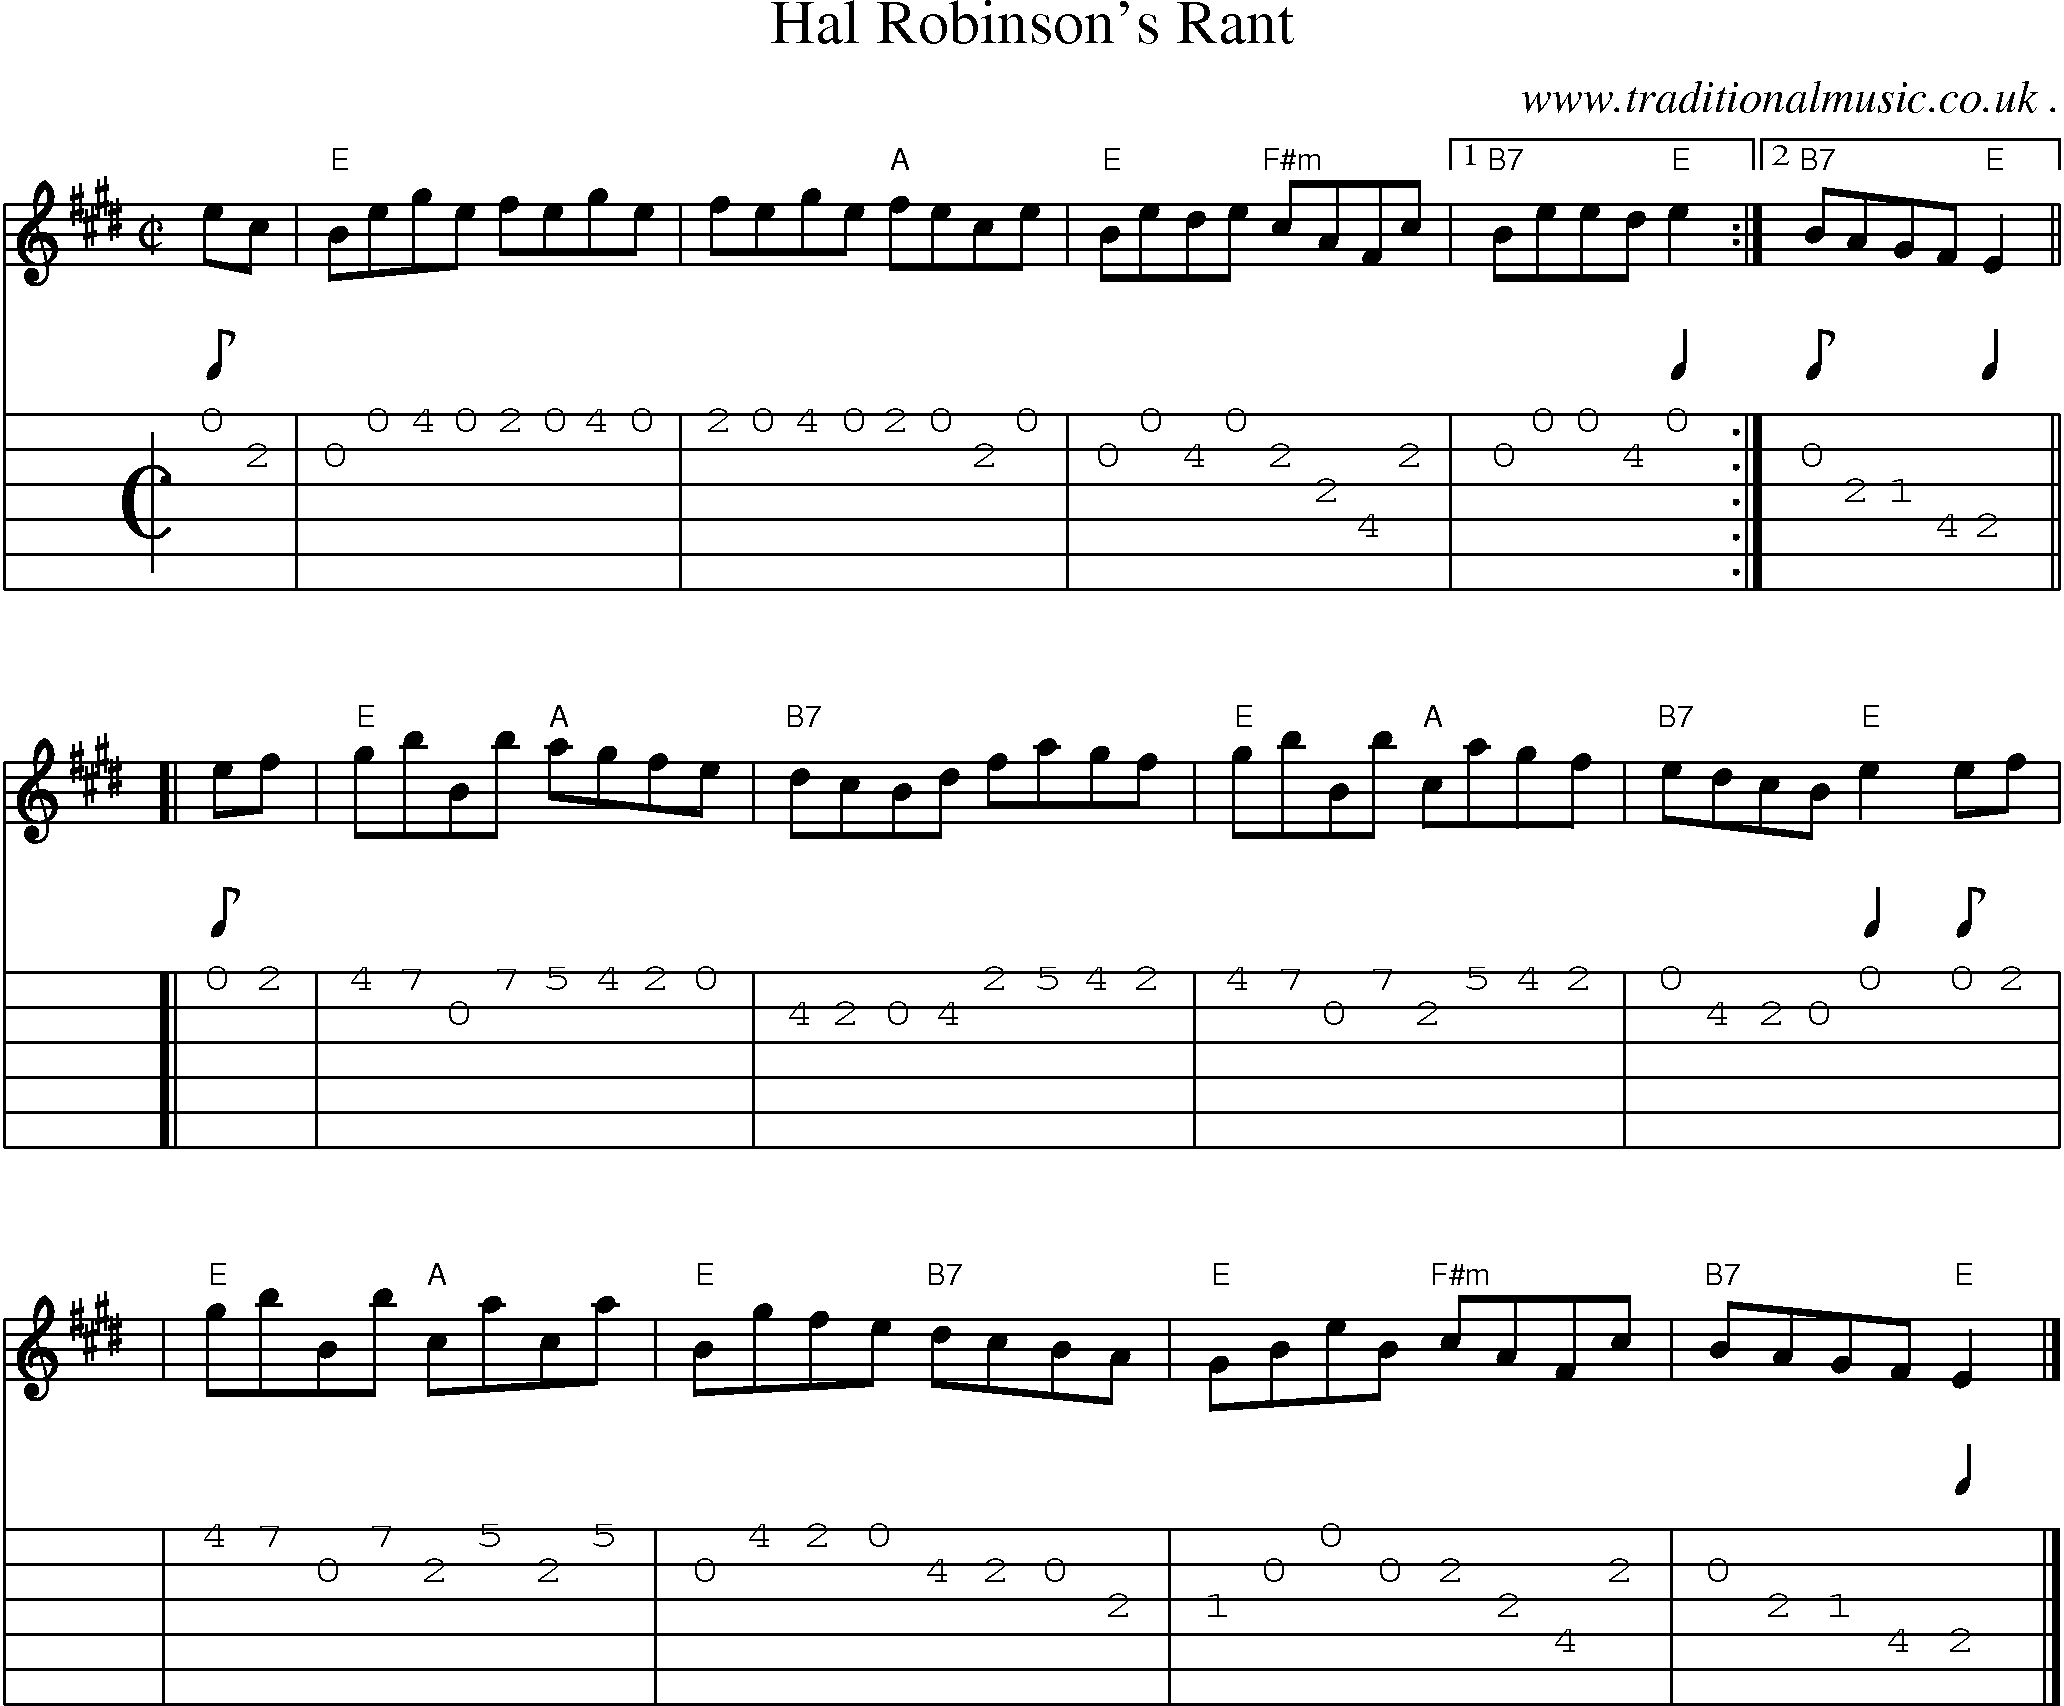 Sheet-music  score, Chords and Guitar Tabs for Hal Robinsons Rant